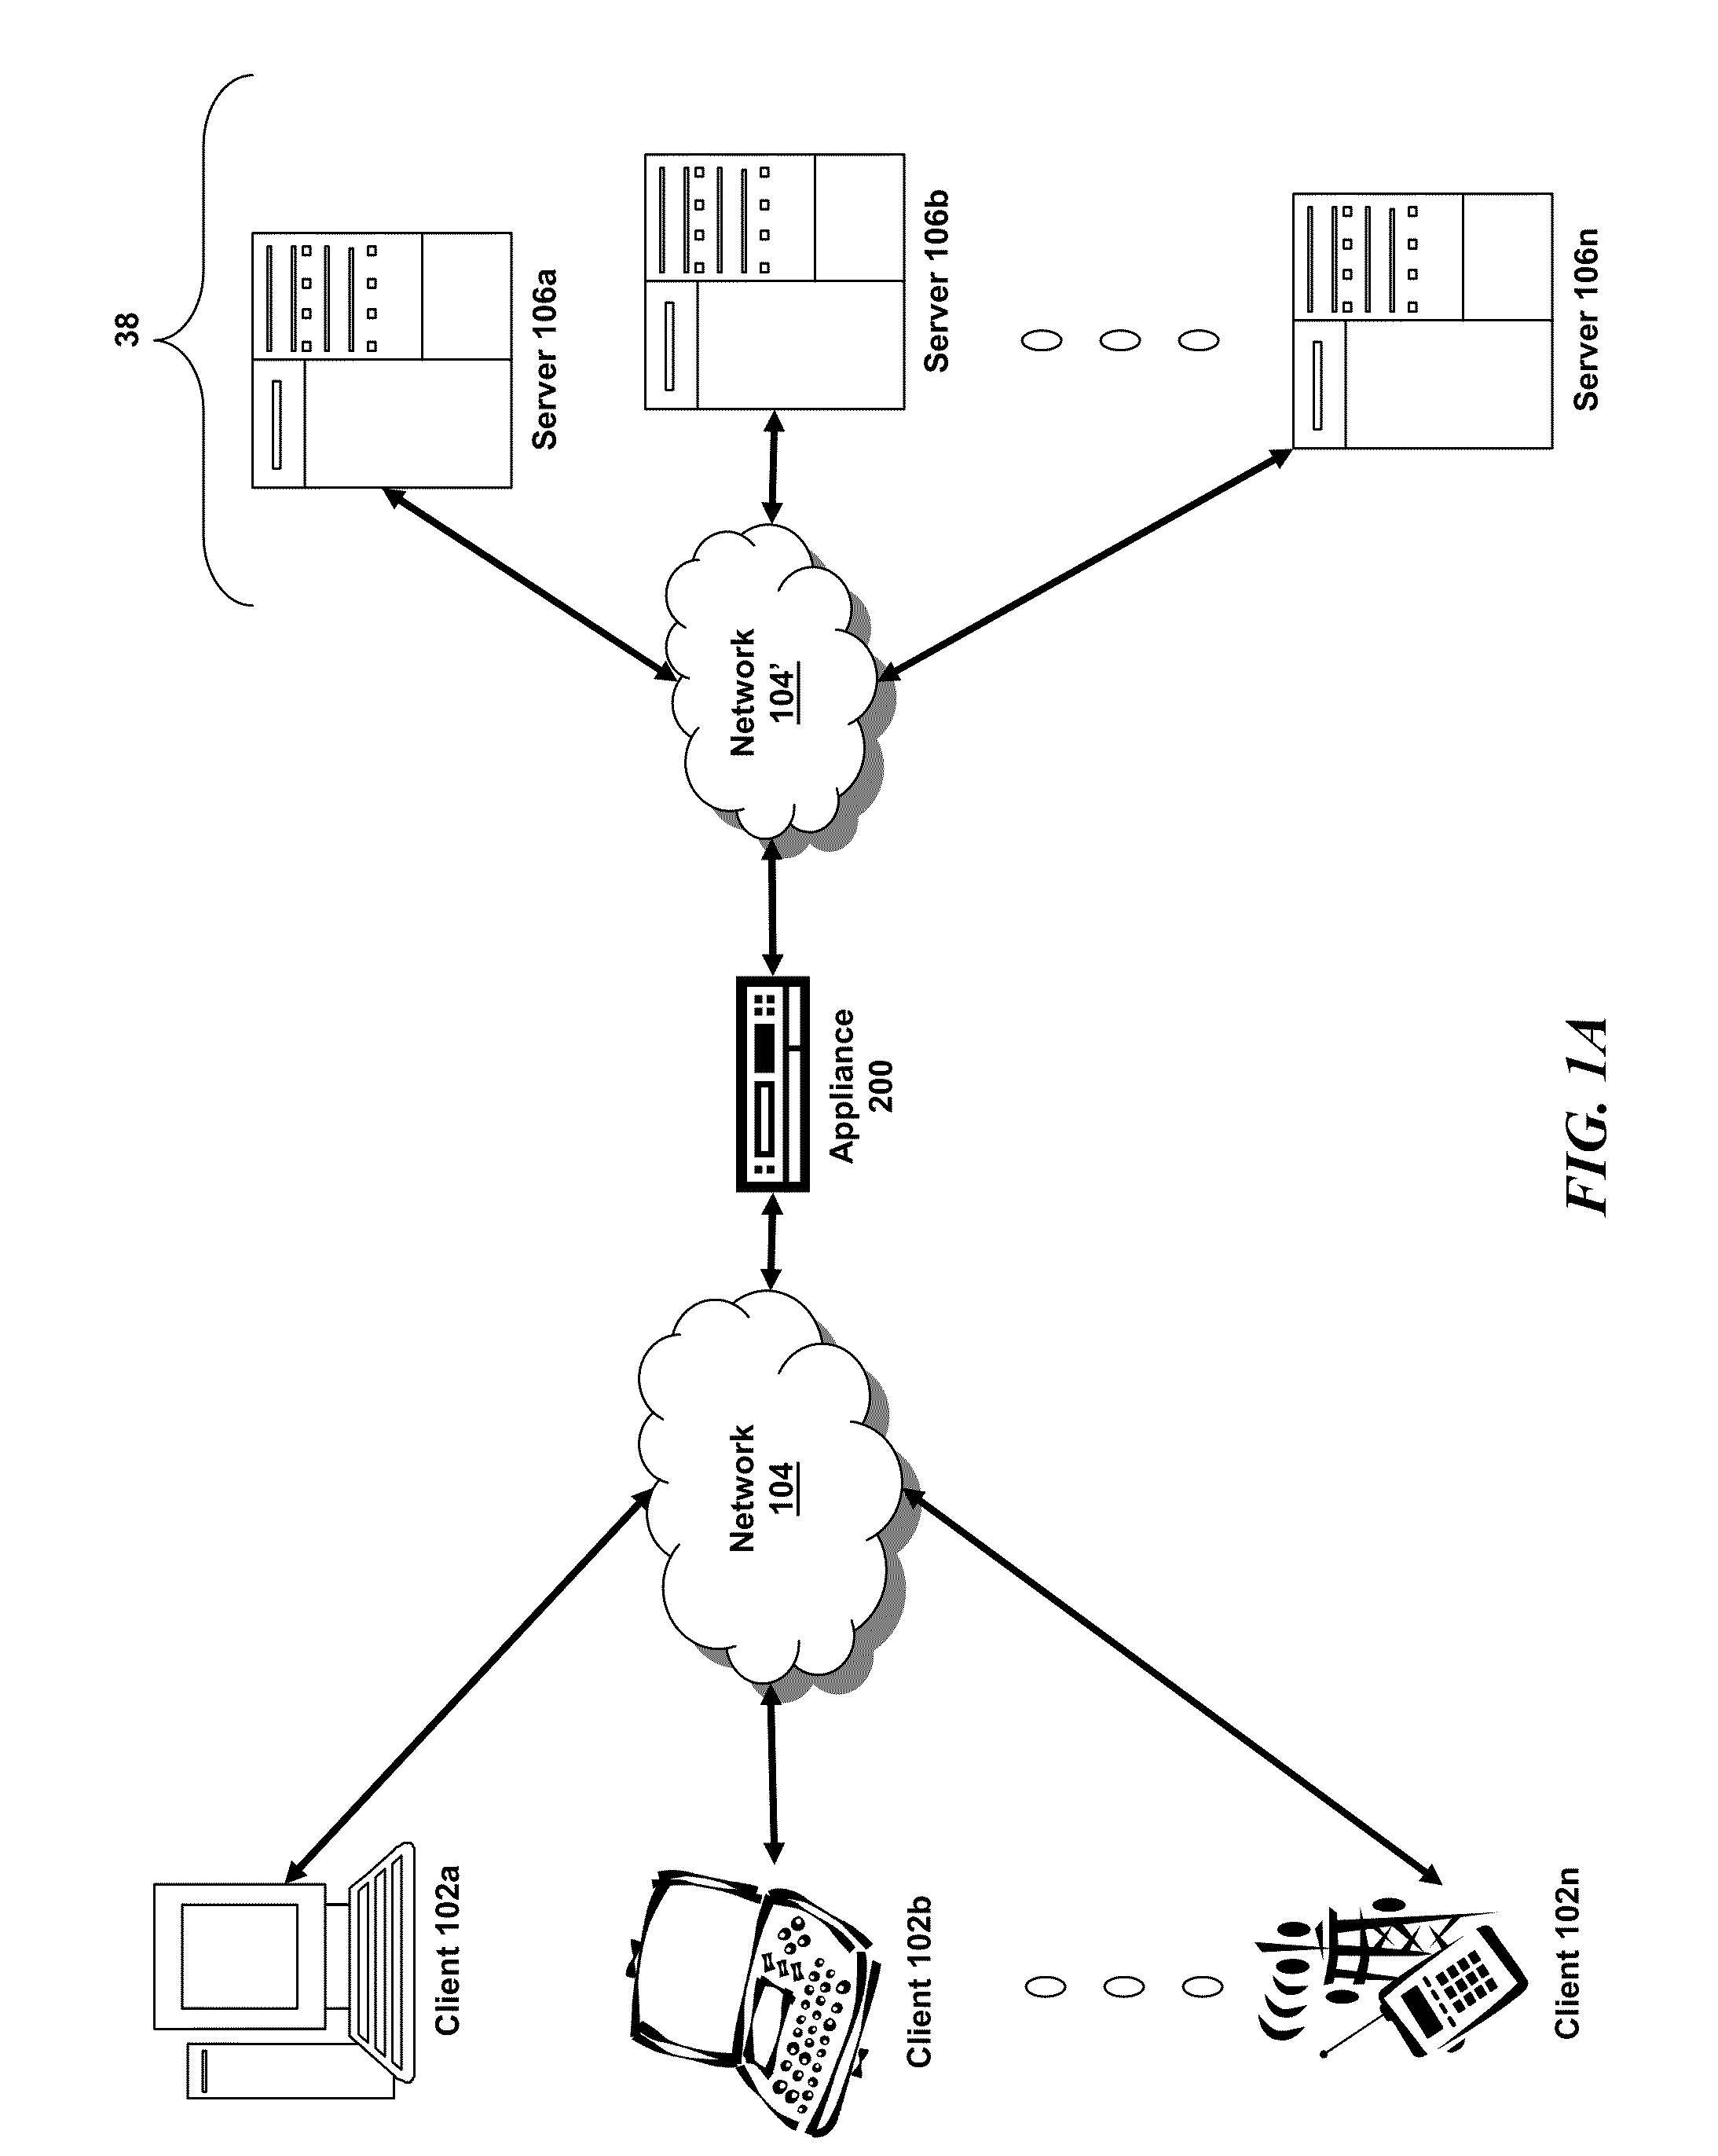 Systems and methods for intercepting and automatically filling in forms by the appliance for single-sign on